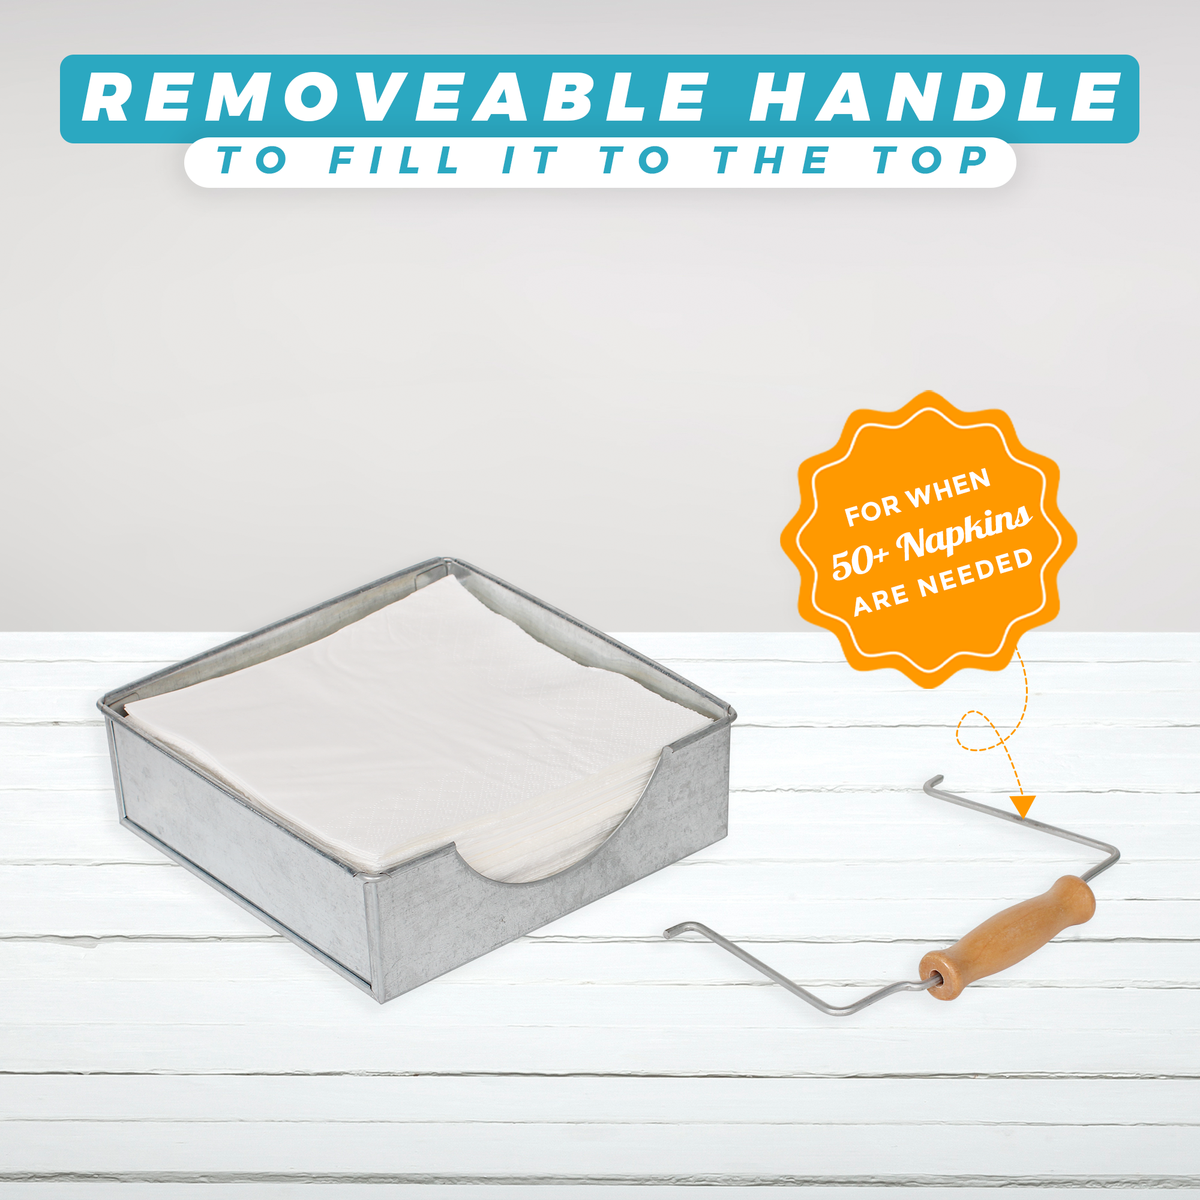 Napkin holder with removable arm to fit 50+ napkins when needed